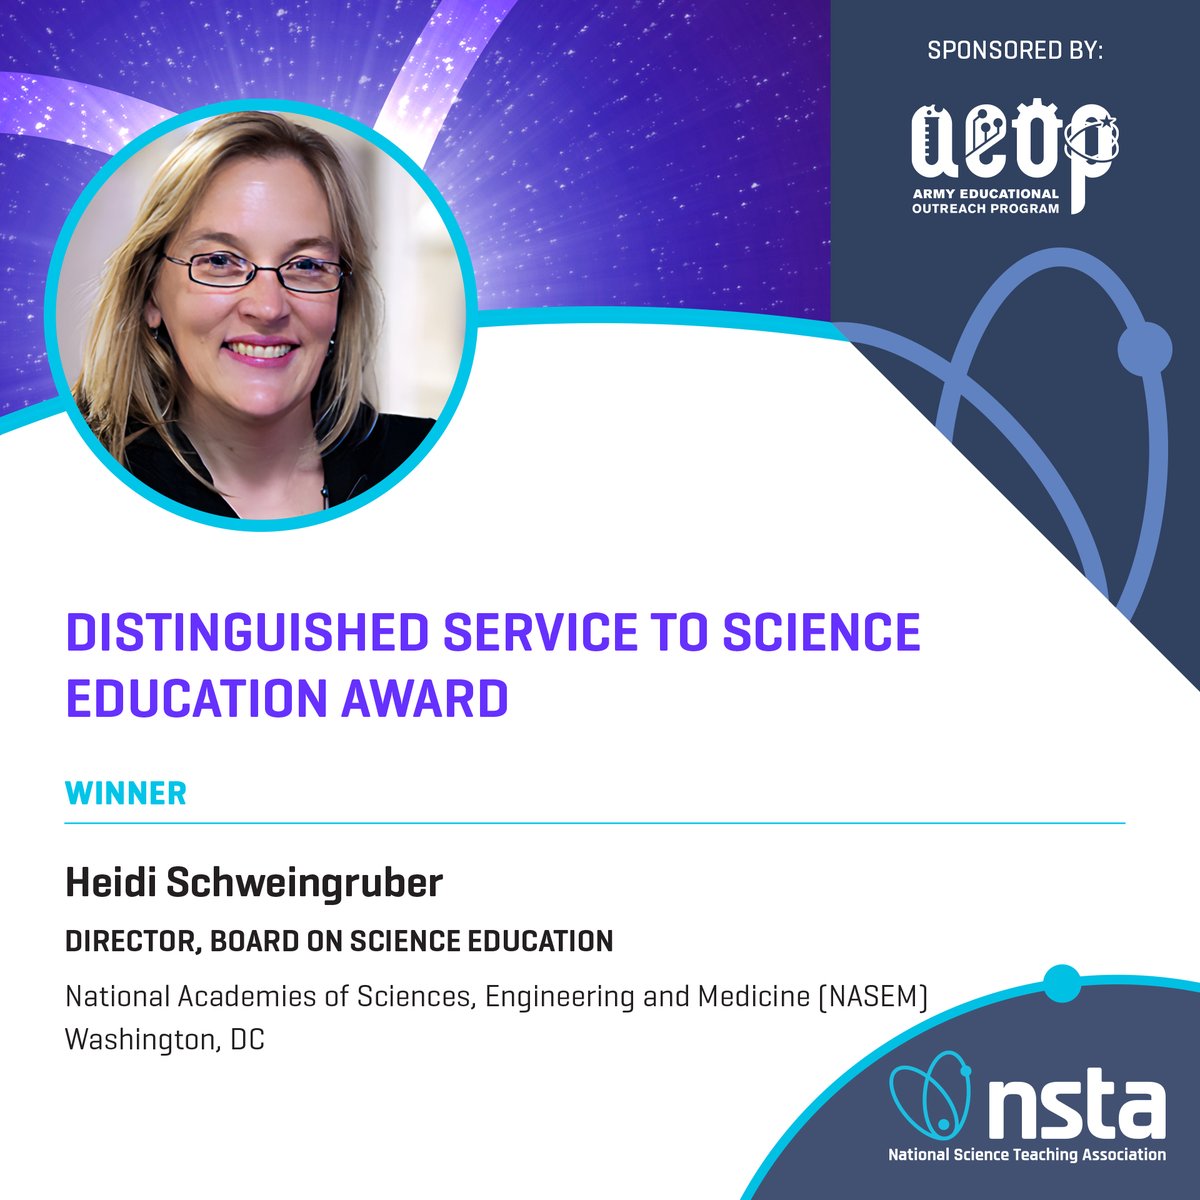 Congratulations to the winner of the #NSTA Distinguished Service to Science #Education Award, Heidi Schweingruber, director of the Board on Science Education @theNASEM. The award, sponsored by @AEOP, was presented to Heidi last month at #NSTA23 Atlanta. 🥳🥳 #STEM #Teacher